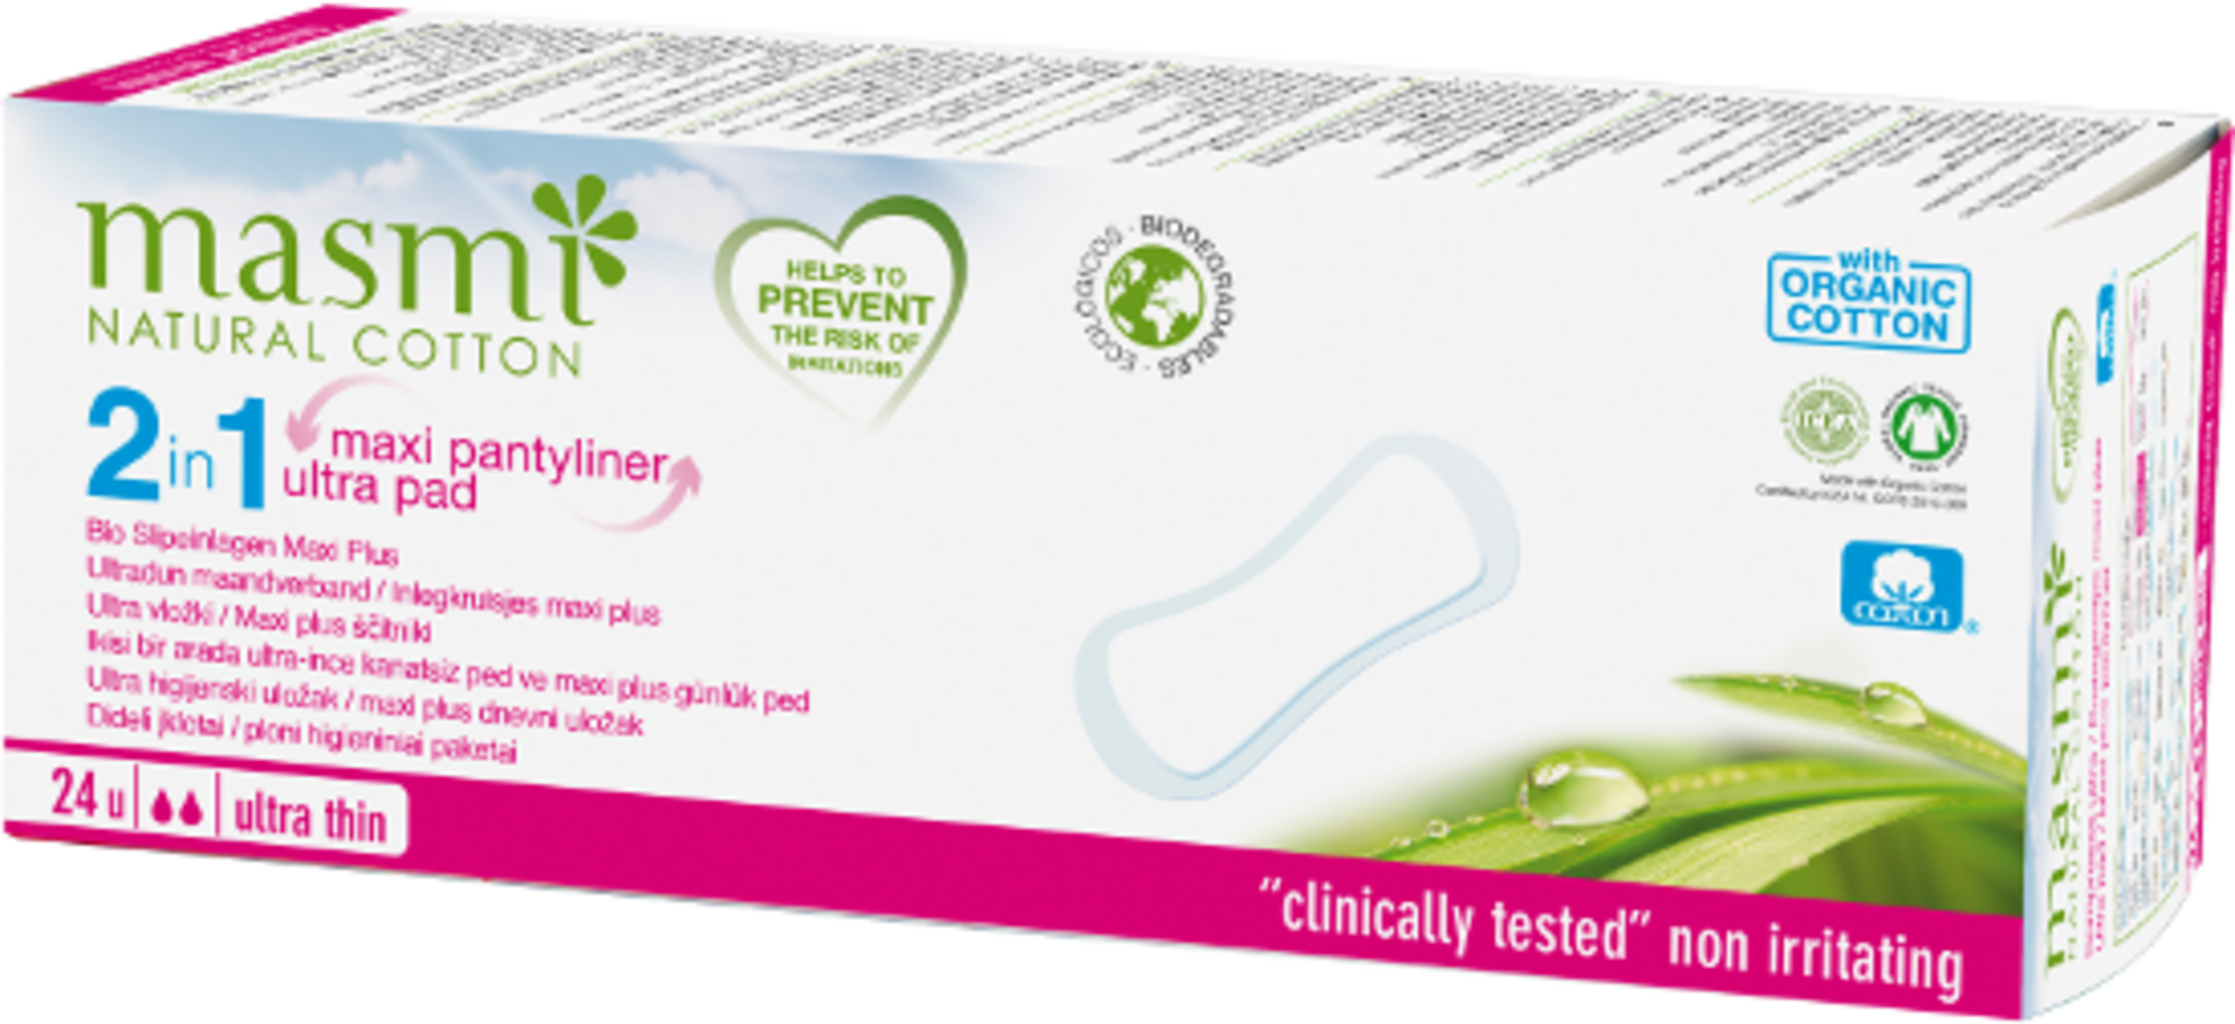 Siempre Normal Pantyliners - 32 Pads. Ecomoj - Buy 100% Authentic products  with confidence